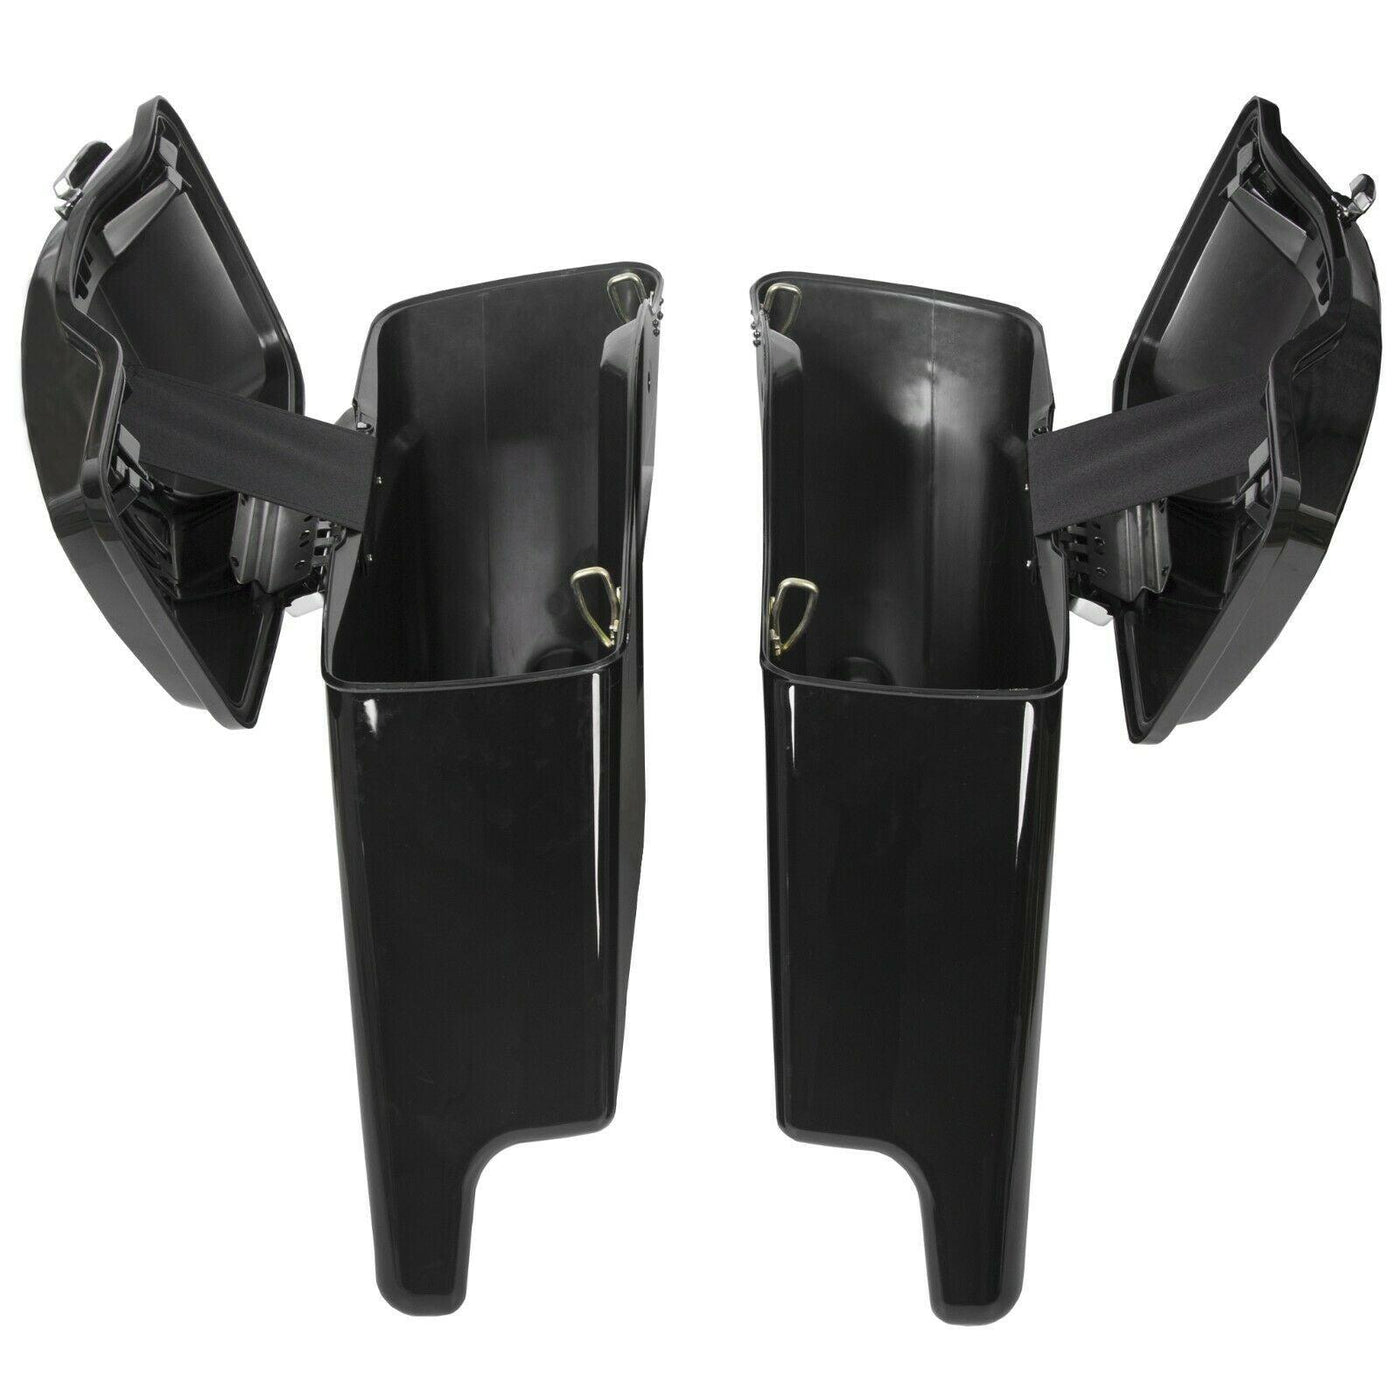 5" Stretched Extended Hard Saddle Bags For 1993-2013 Harley Touring Road King - Moto Life Products